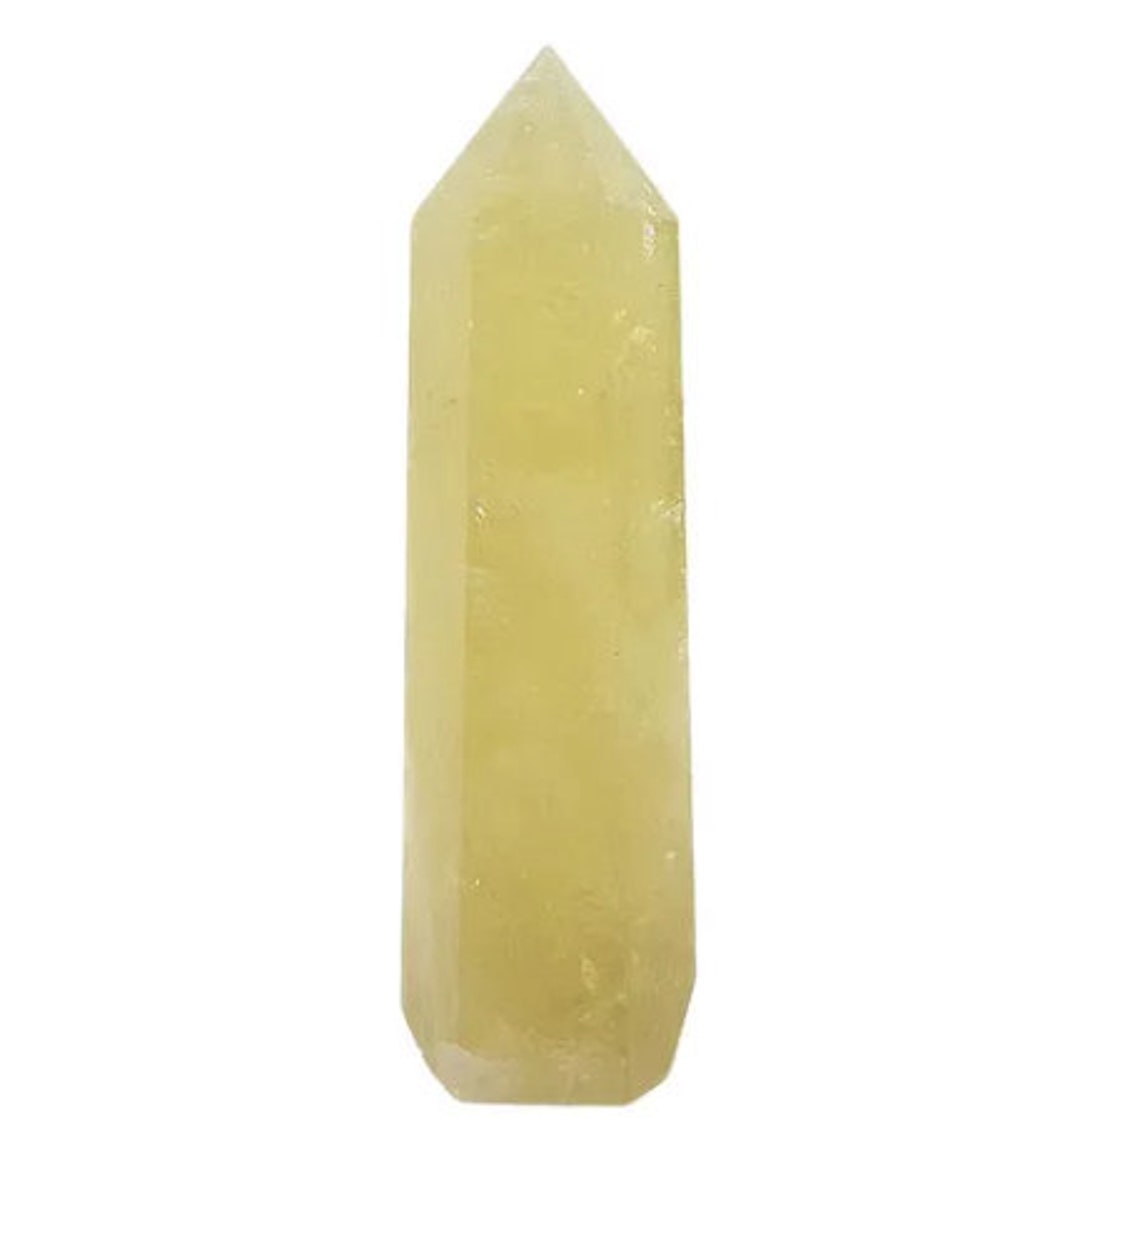 Natural Citrine Crystal Points